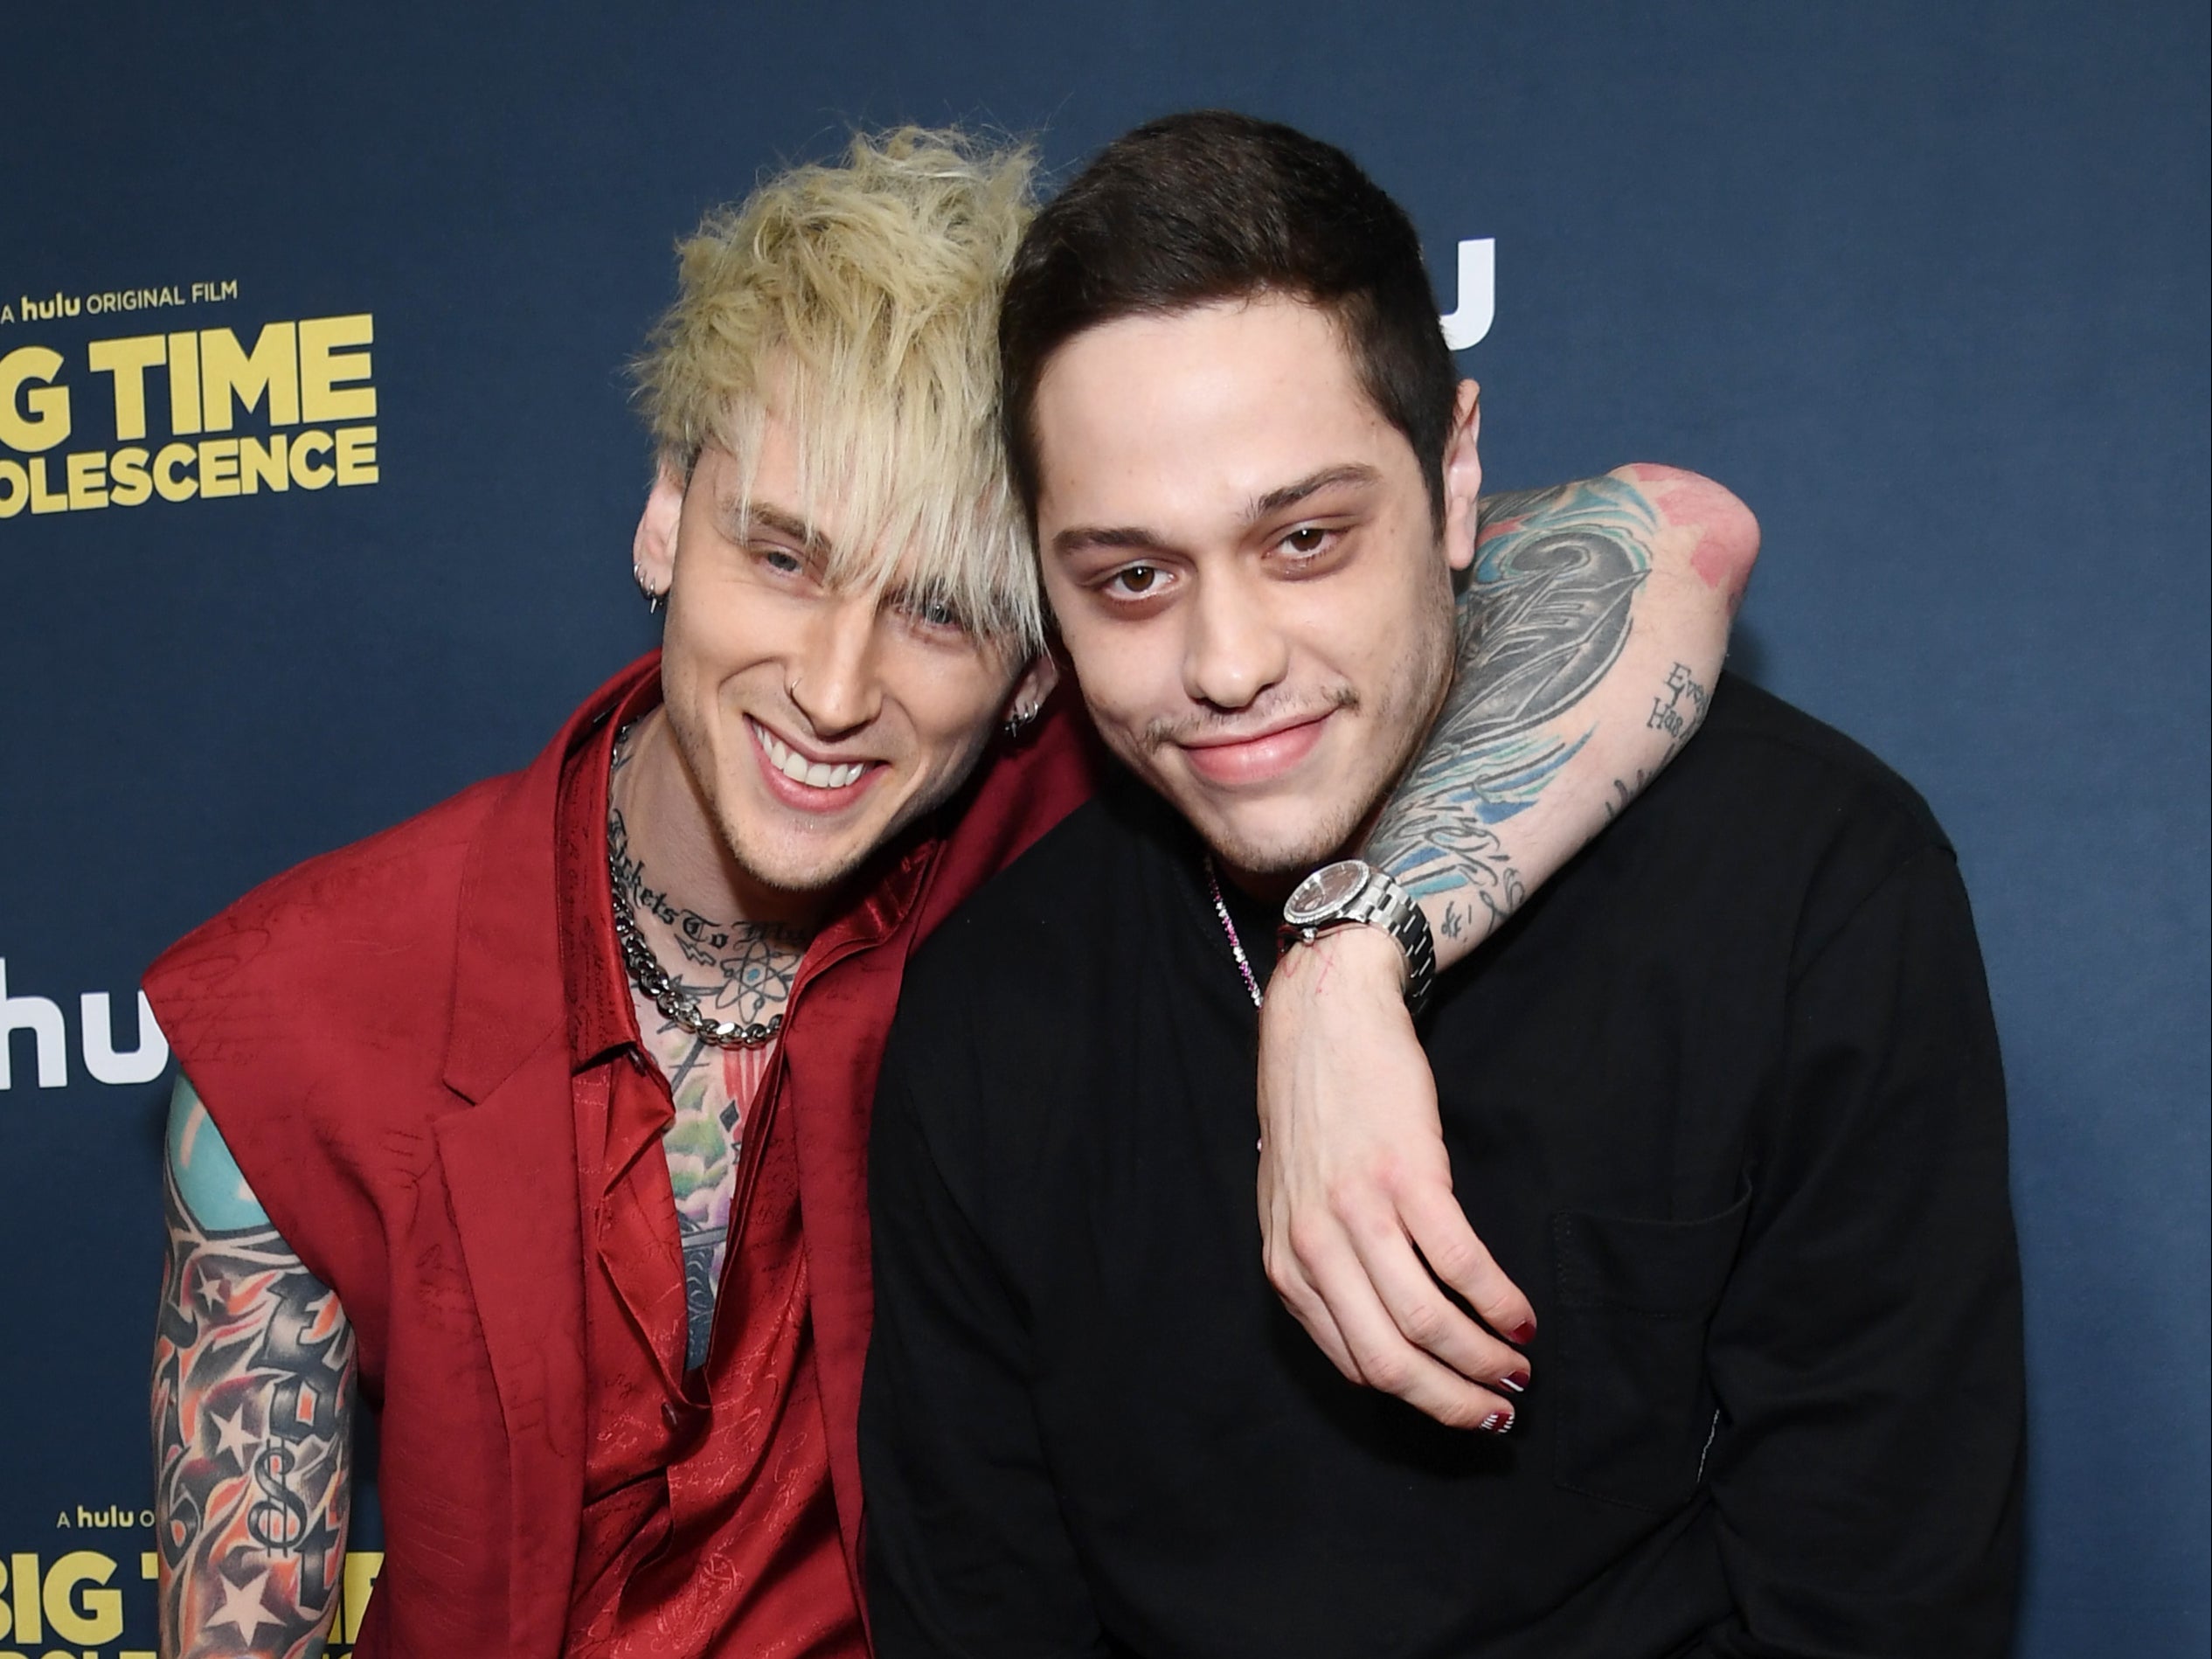 Machine Guy Kelly and Pete Davidson in March 2020